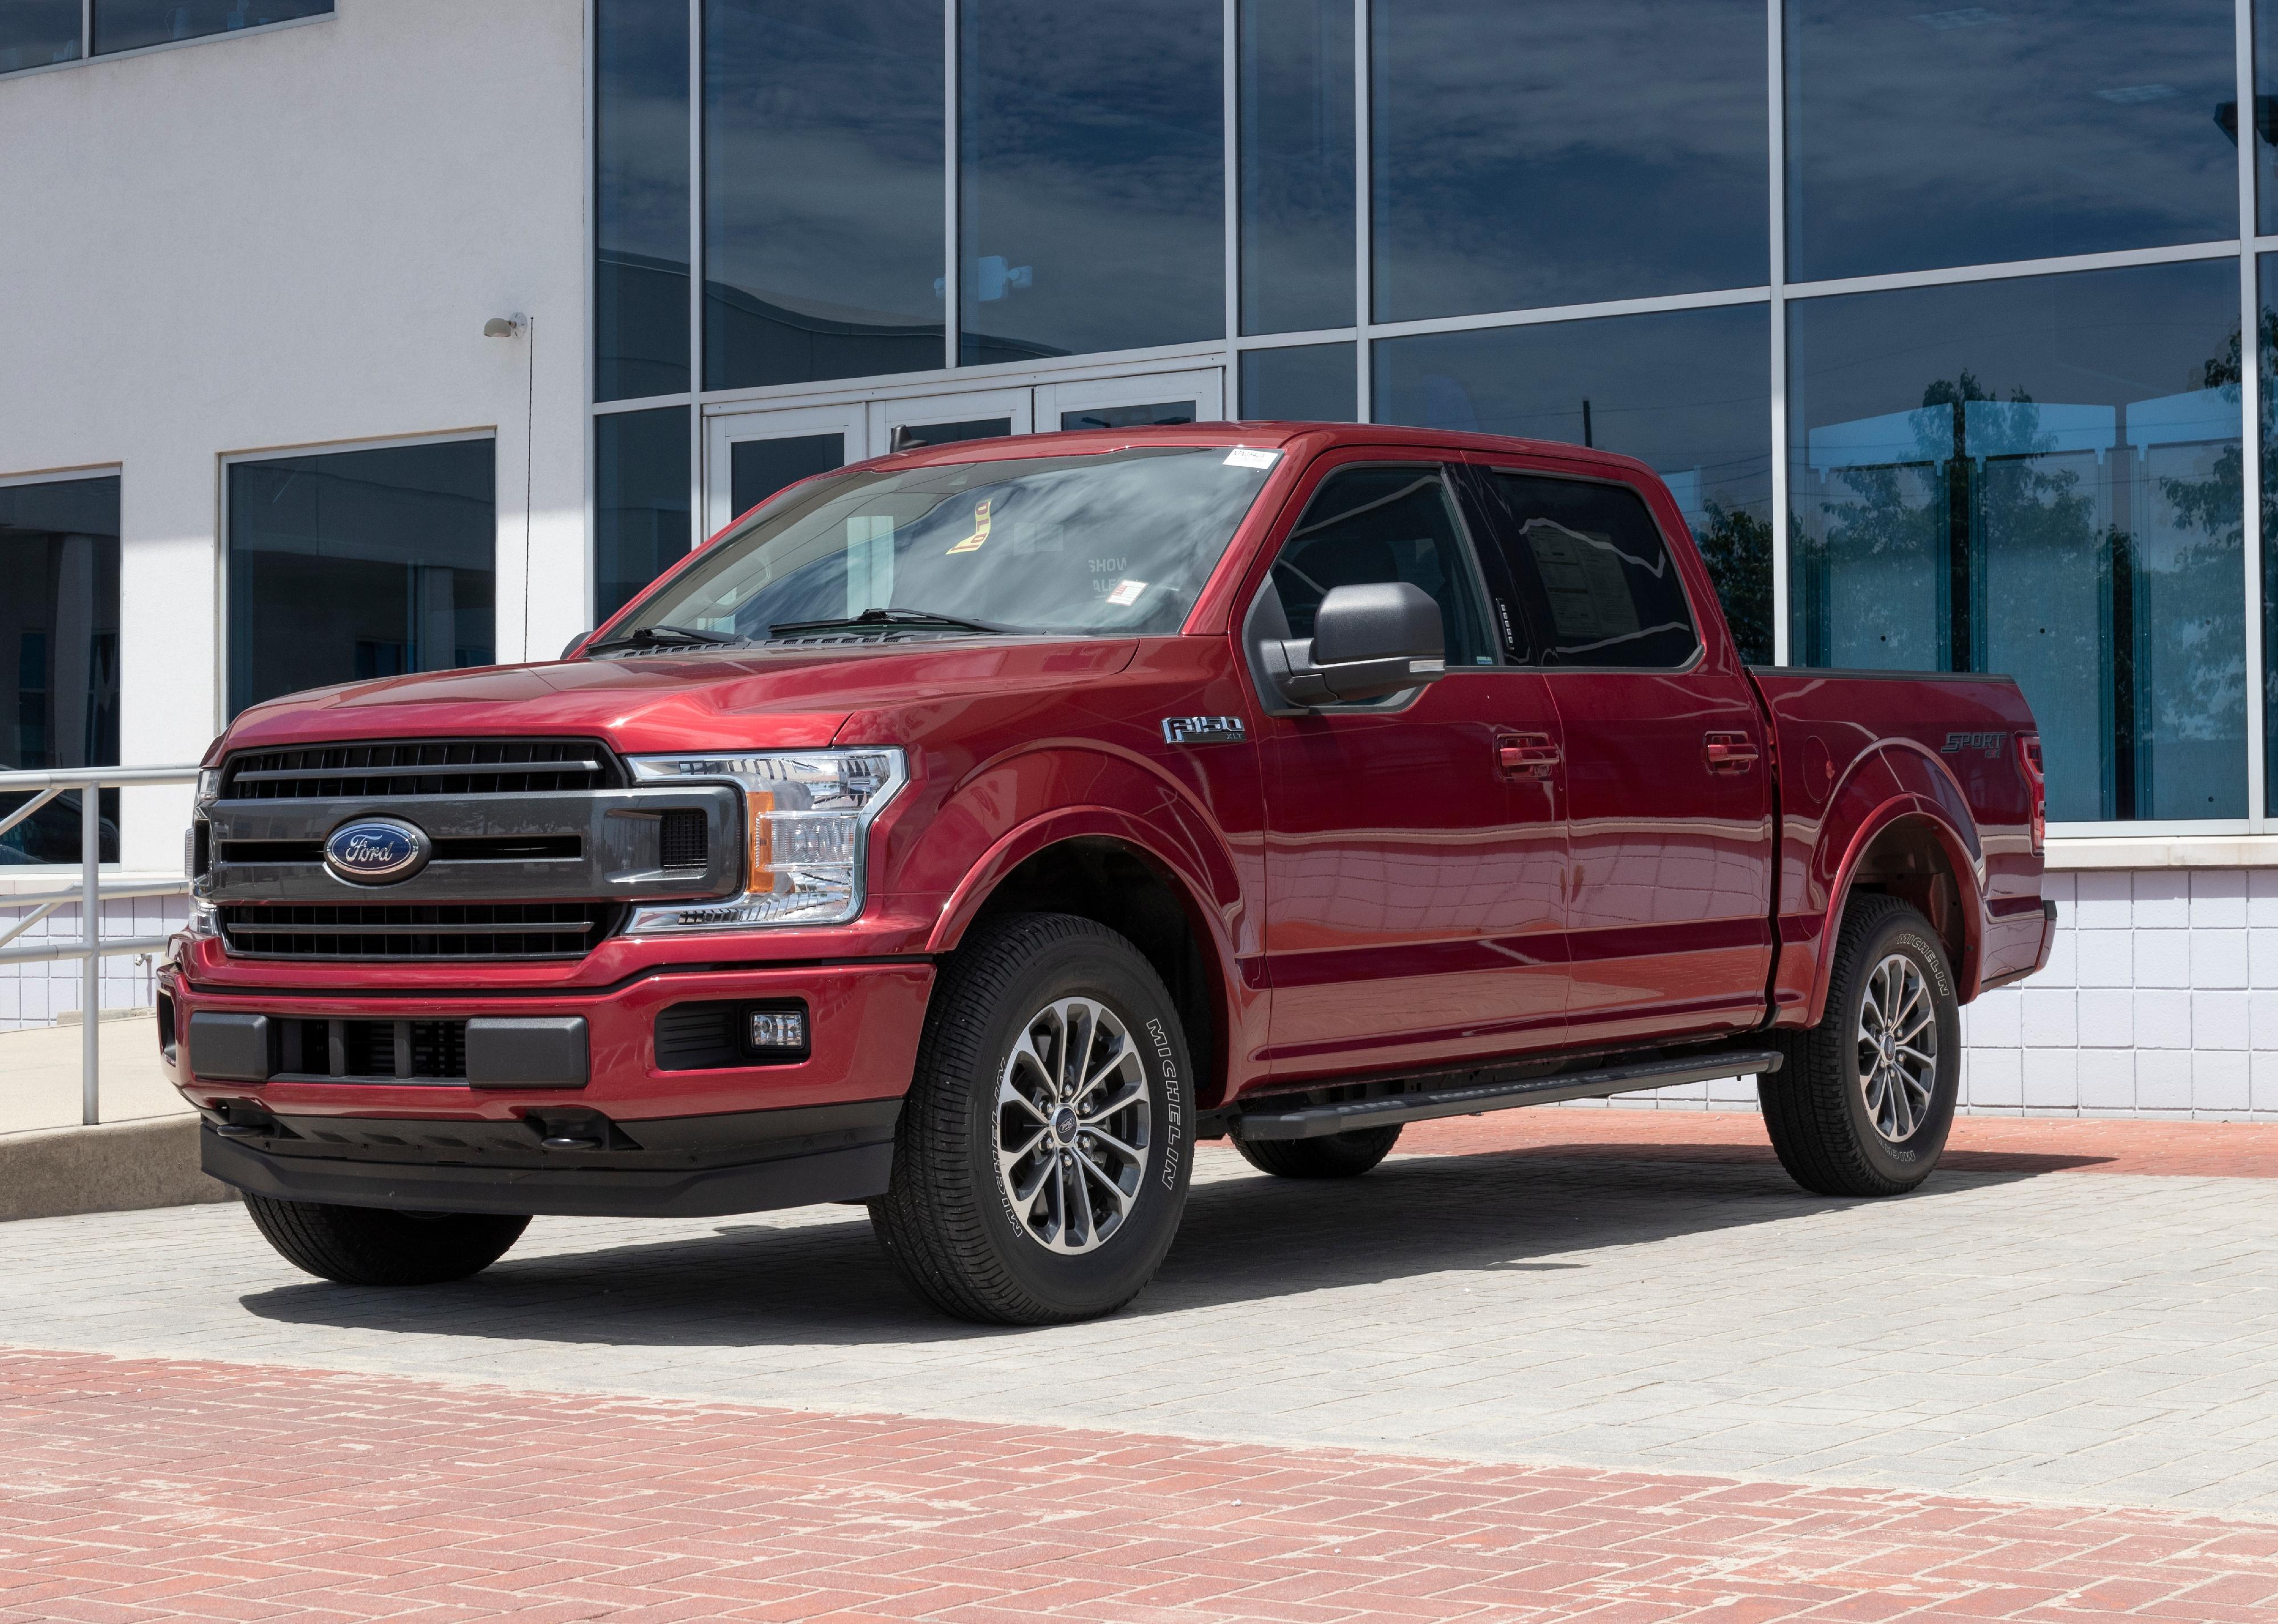 Red Ford F-150 on display at dealership. 